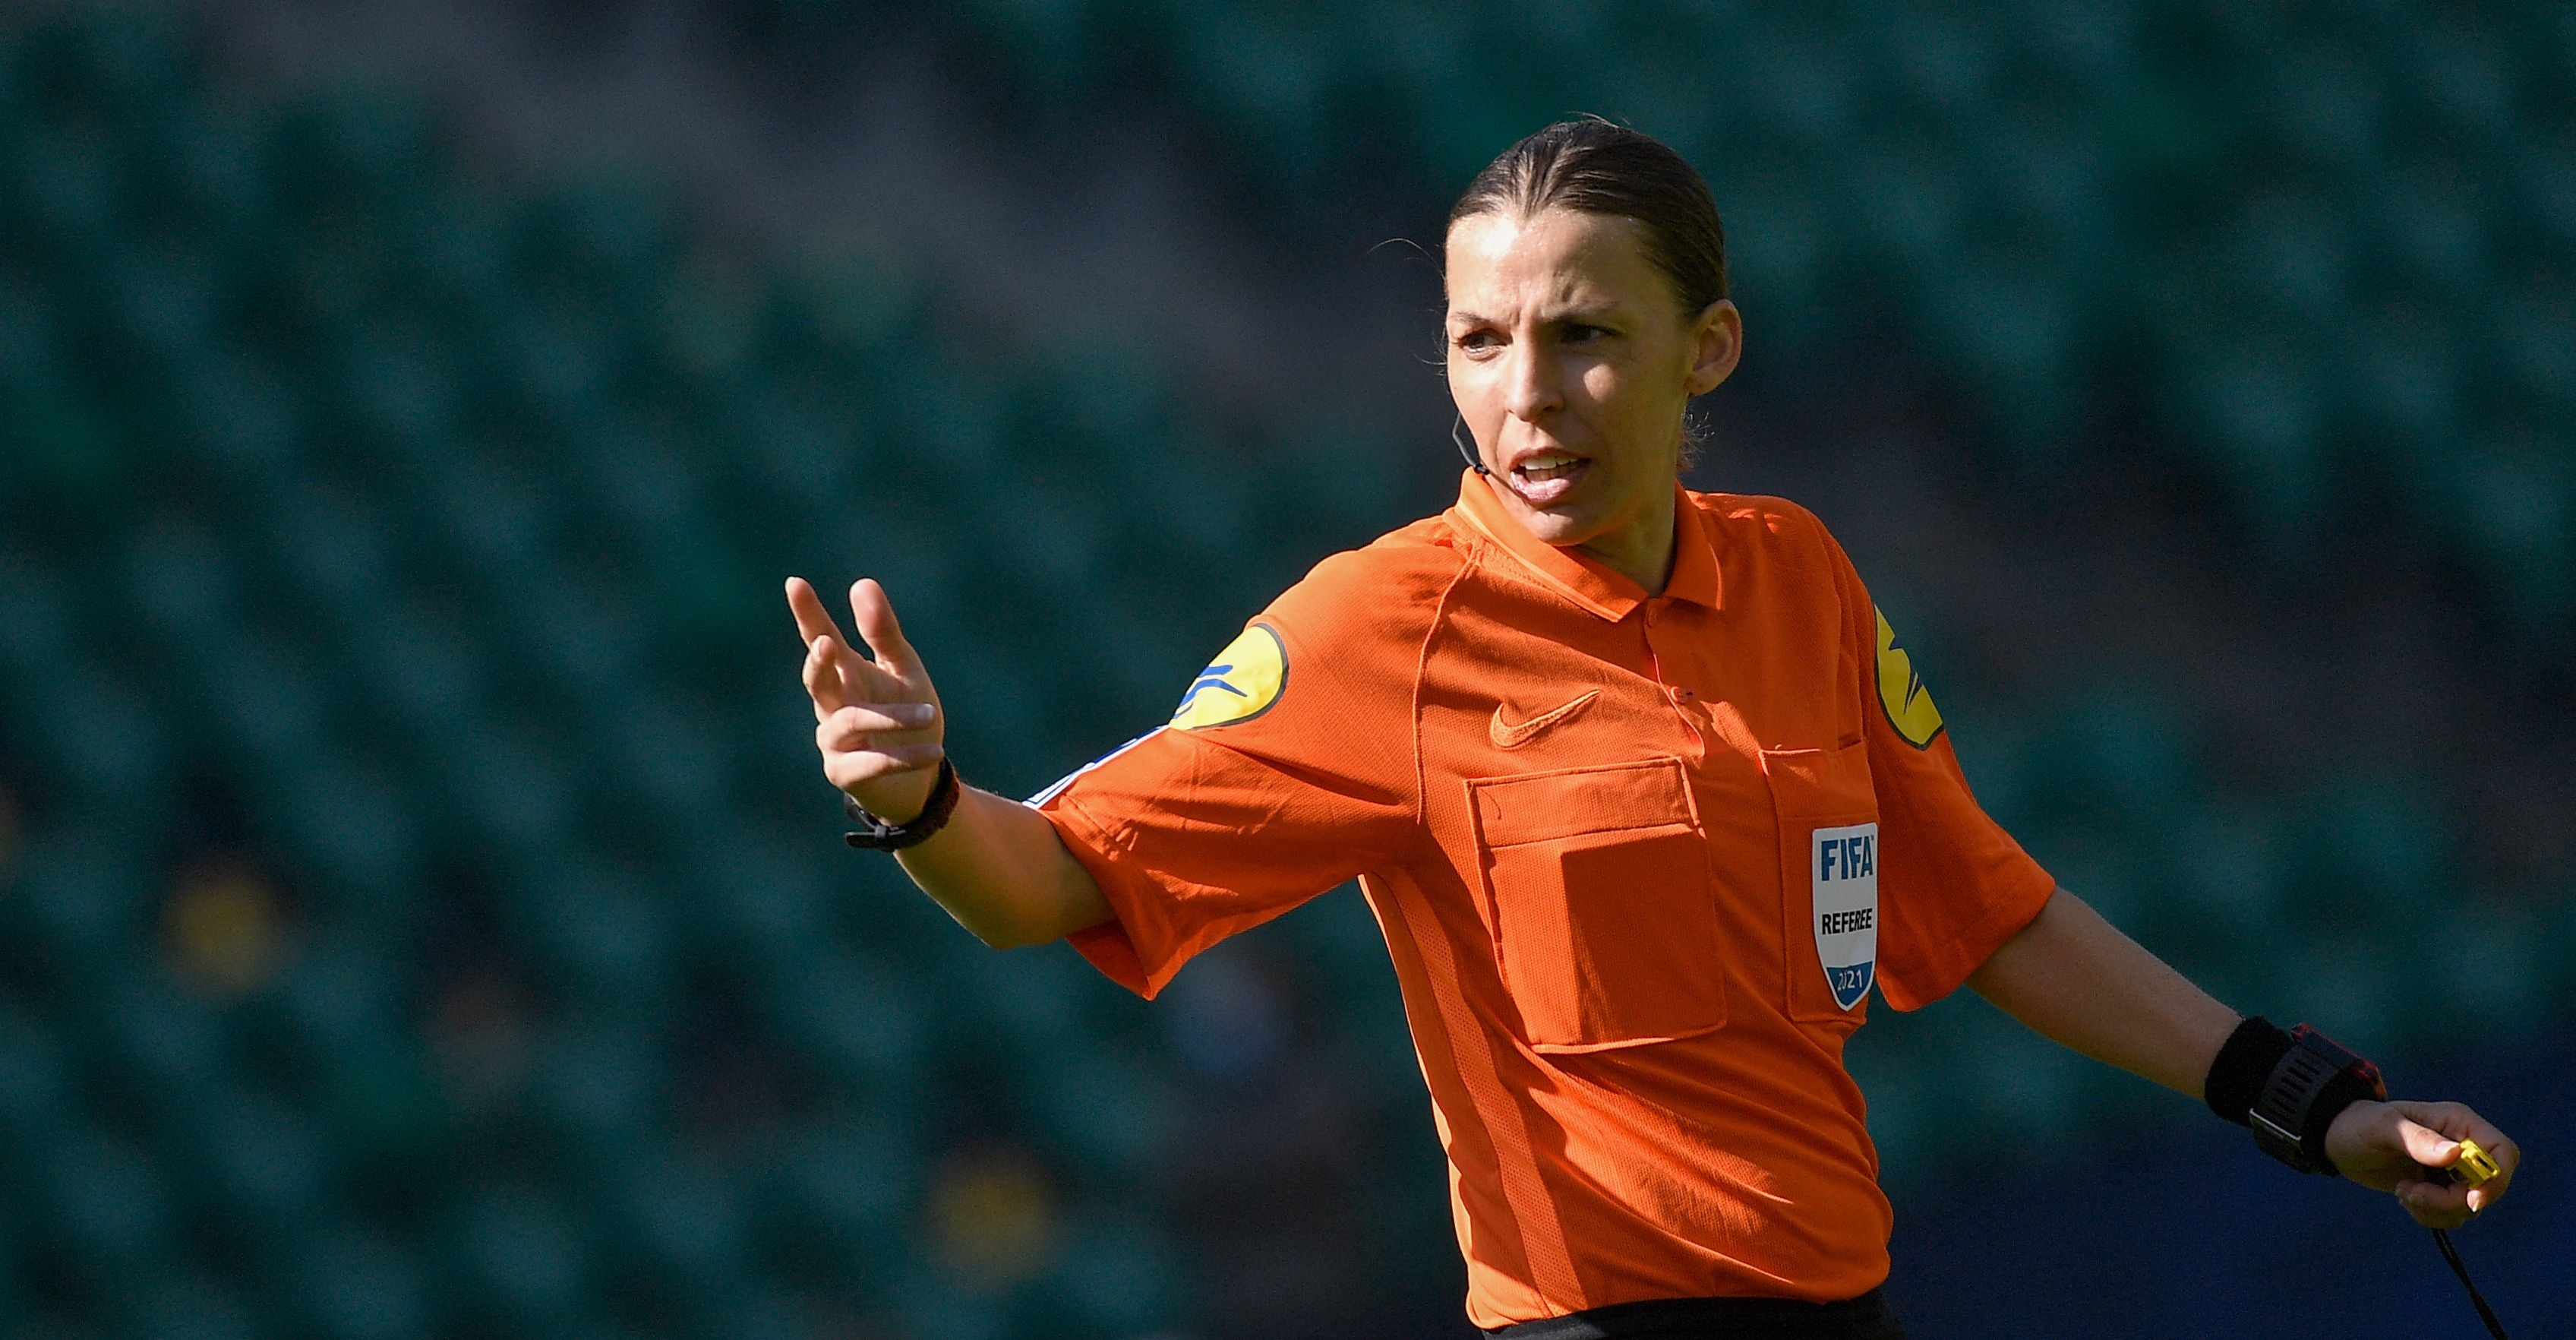 Stephanie Frappart has also refereed matches in Ligue 1 this season